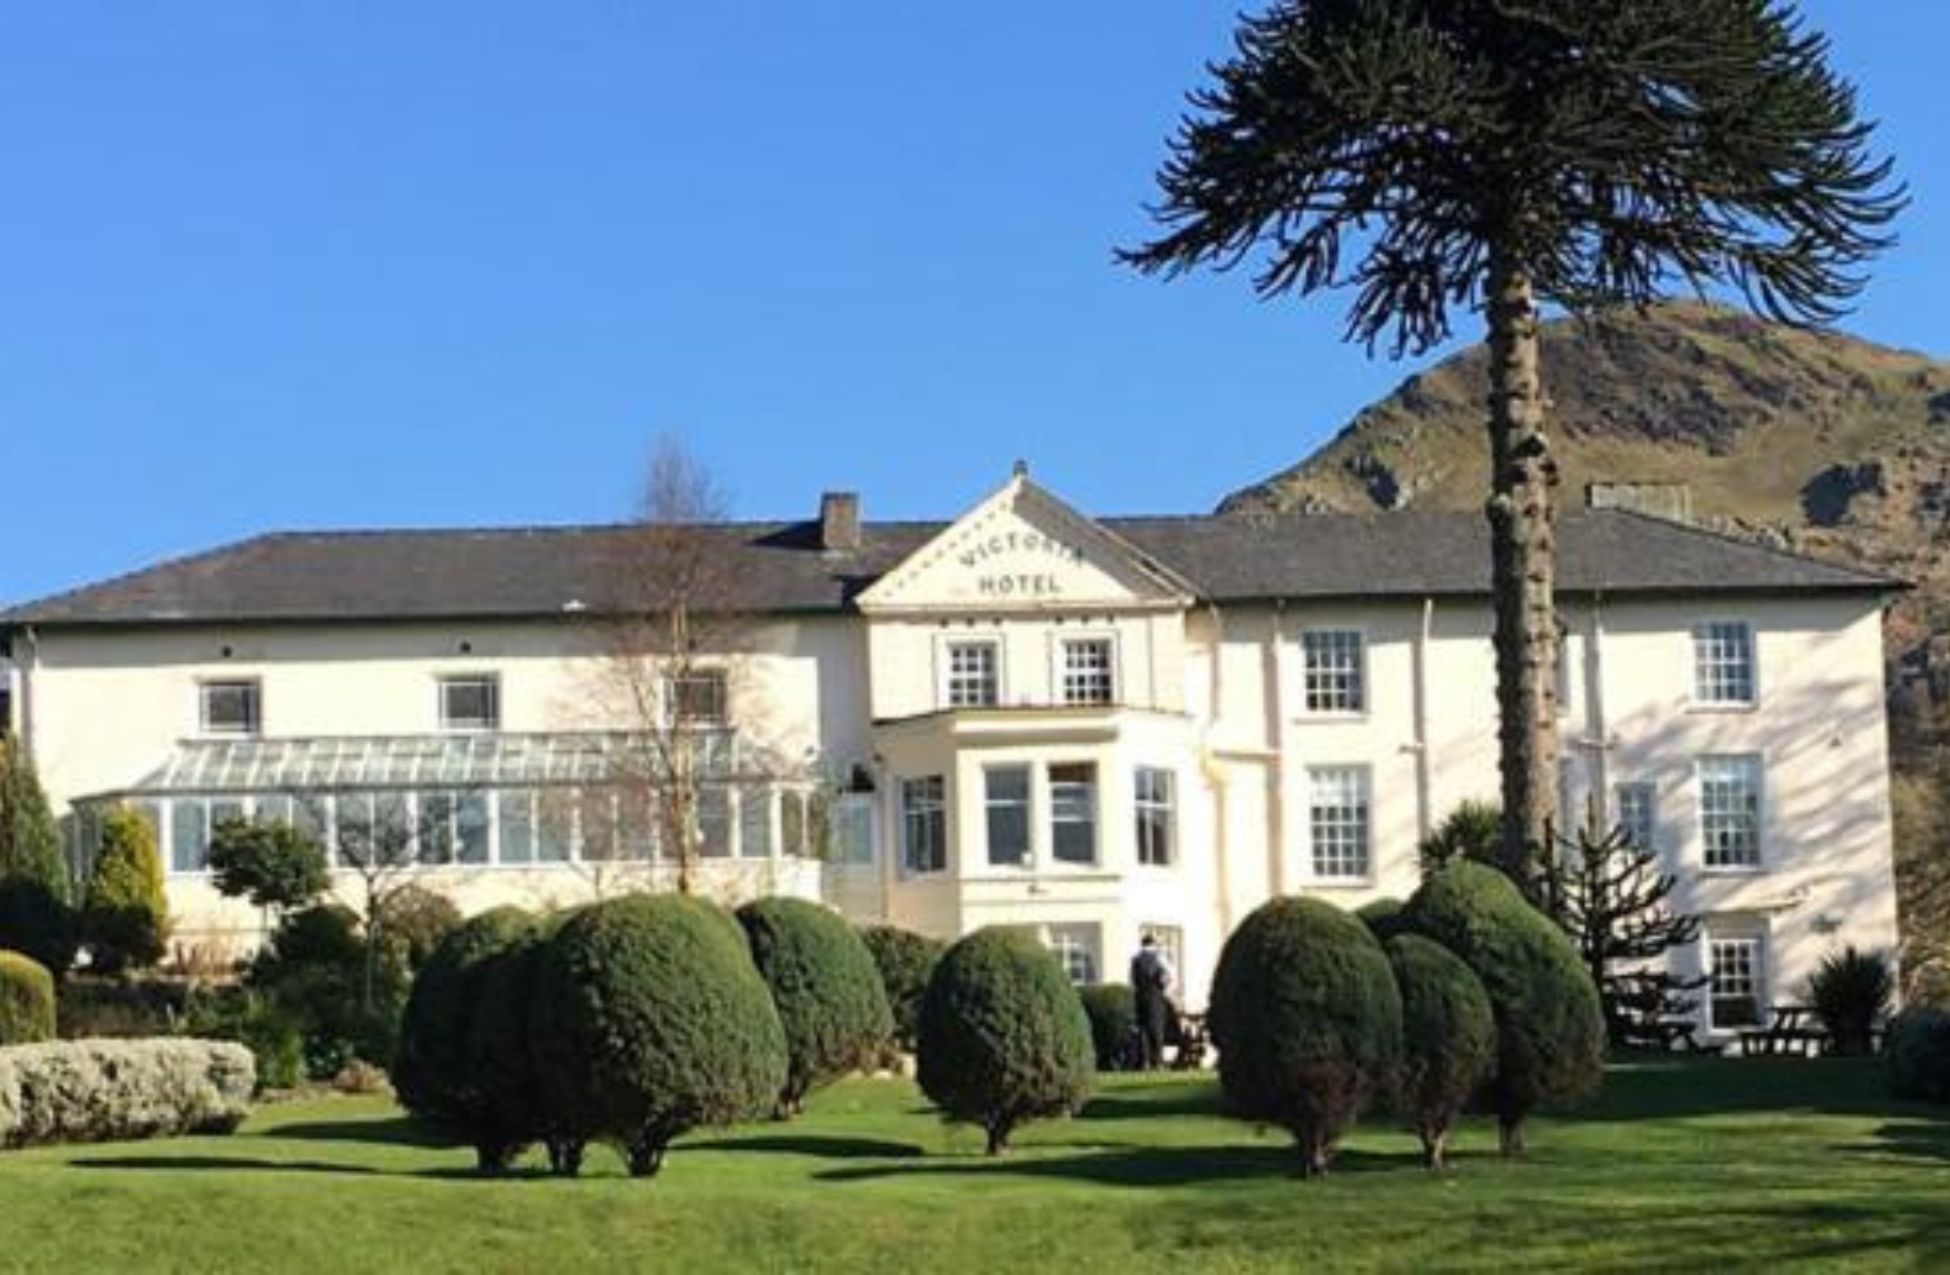 The Royal Victoria Hotel - Best Hotels In Snowdonia